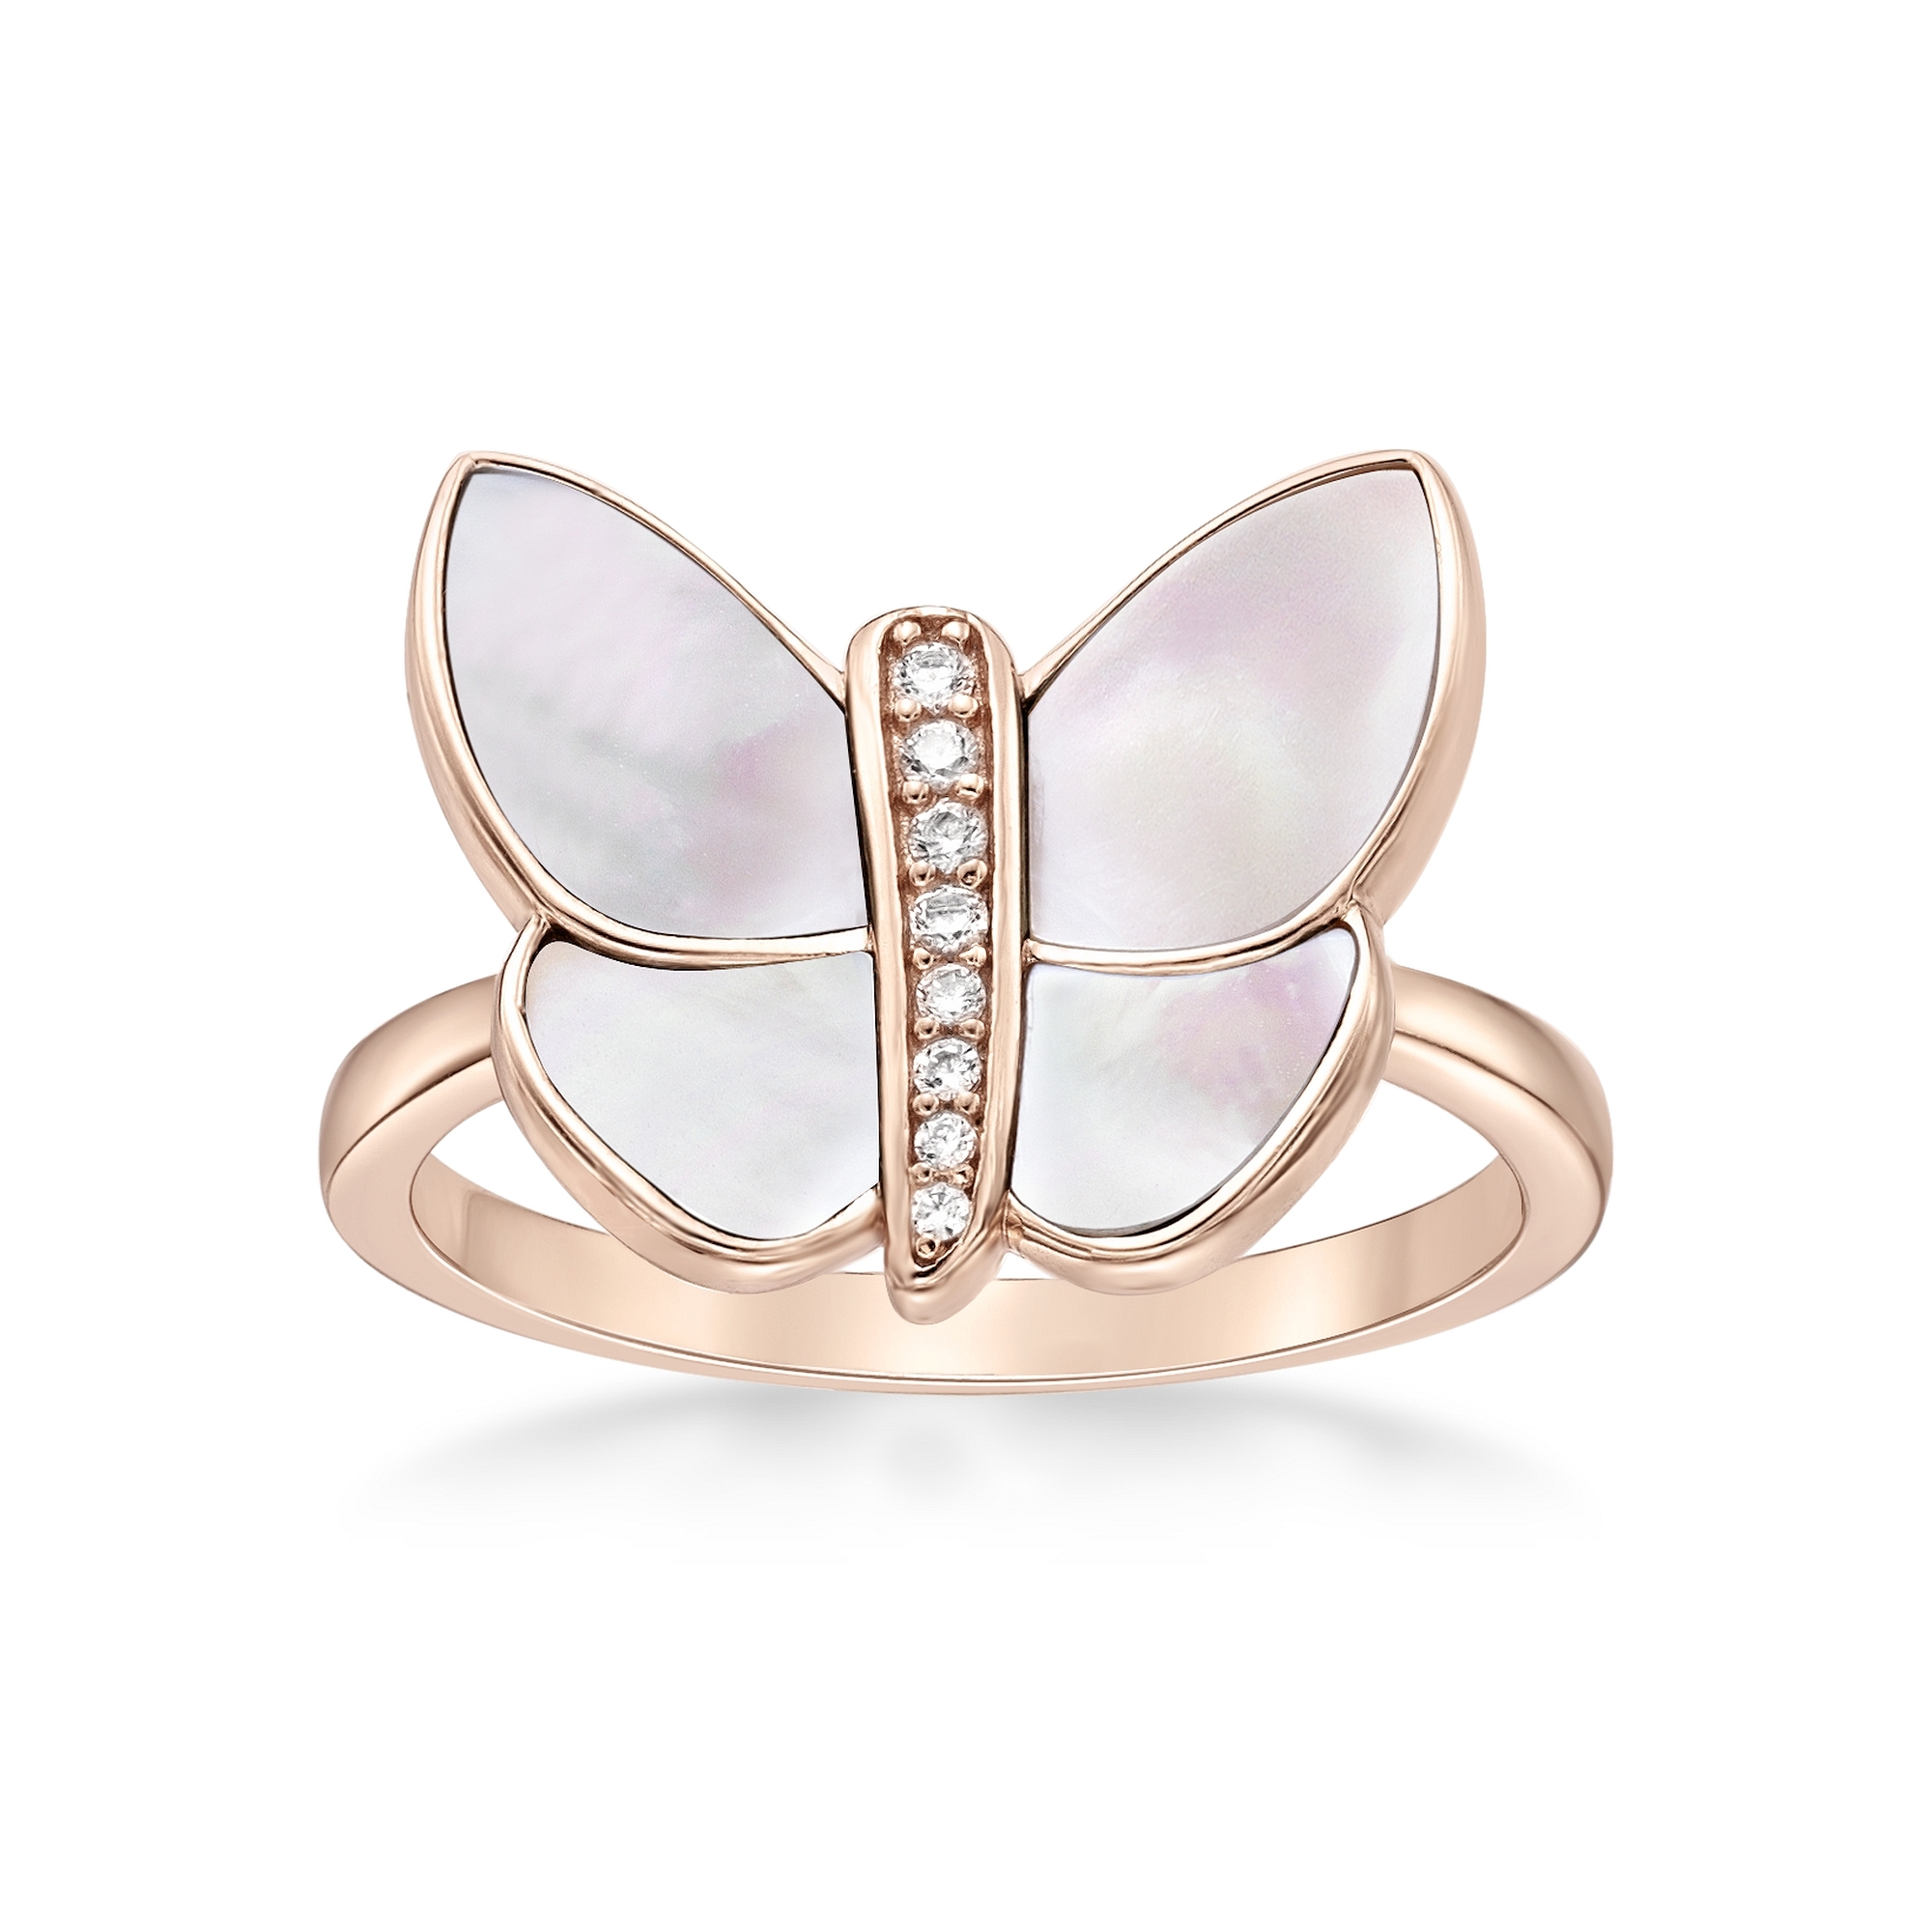 Lavari Jewelers Women’s Mother of Pearl Butterfly Ring, 925 Sterling Silver, Cubic Zirconia, Size 6